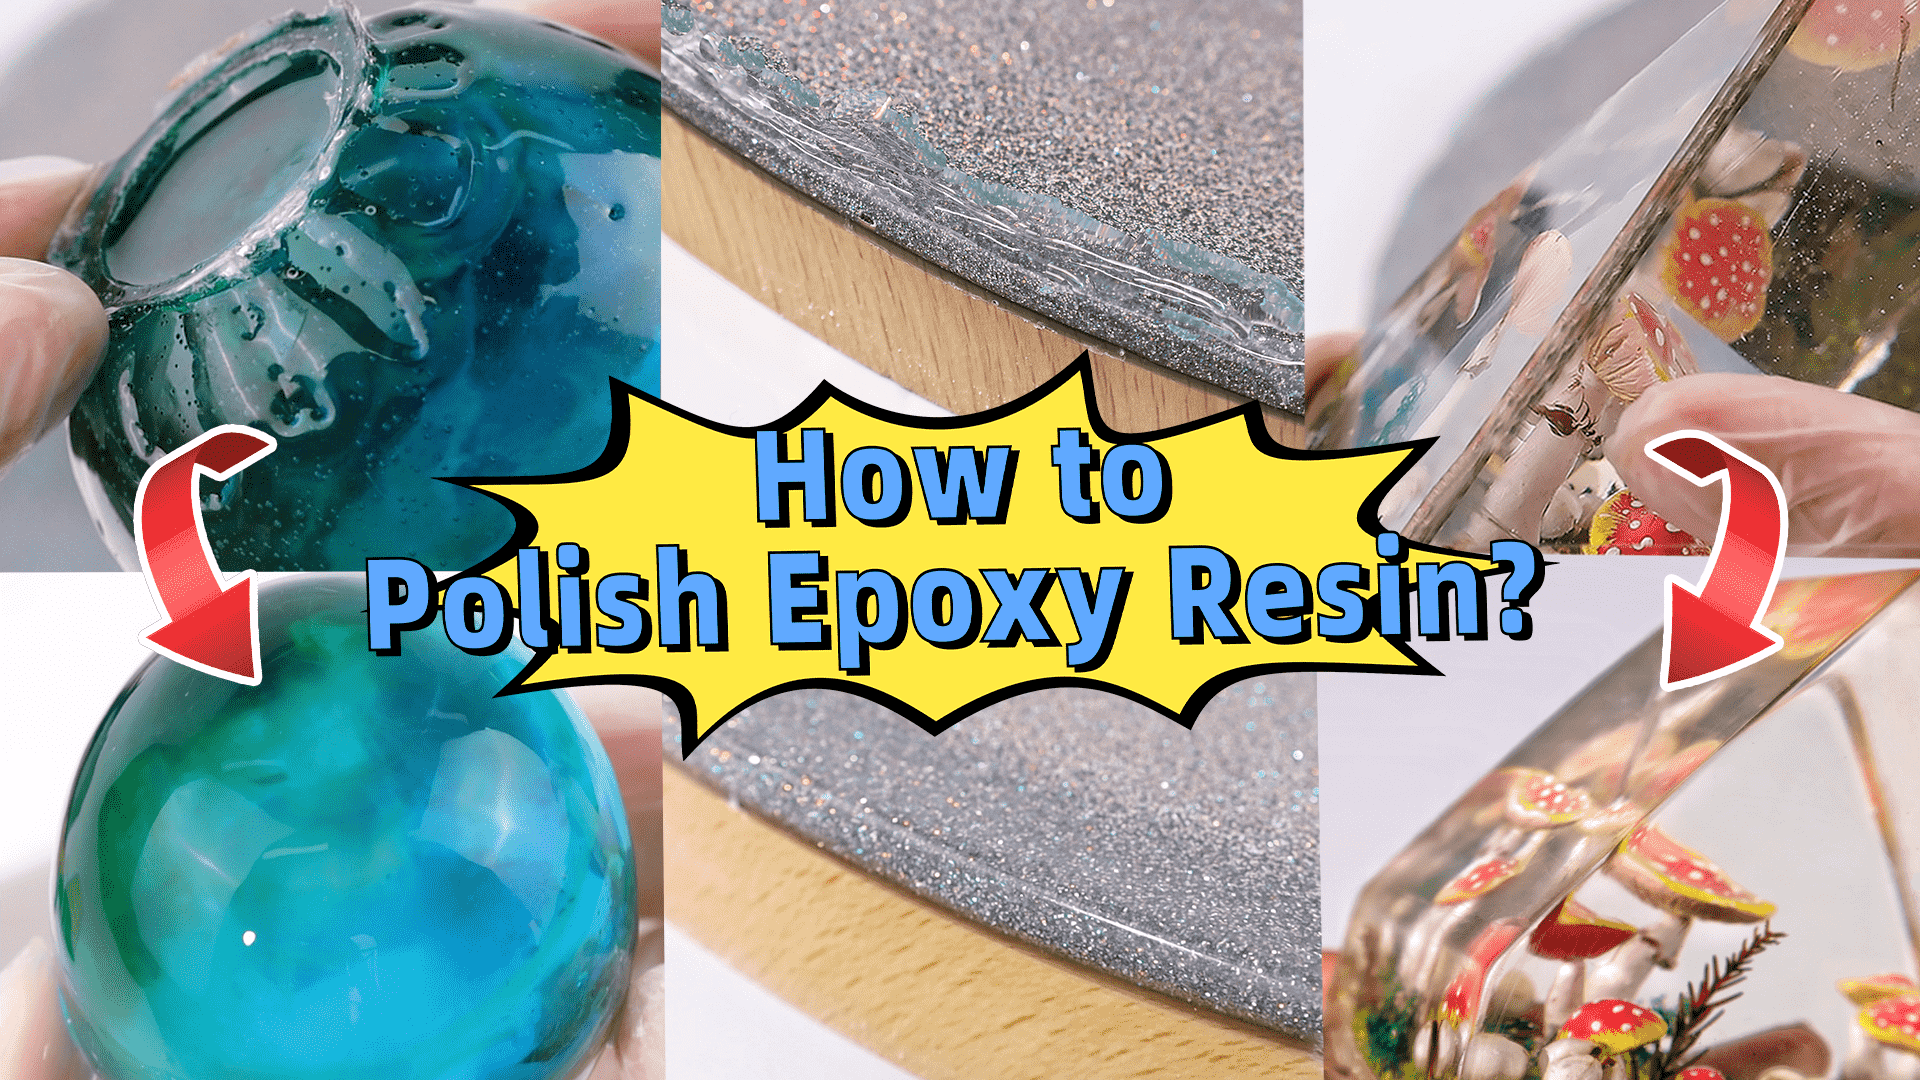 How to Polish Epoxy Resin - The Ins and Outs of Polishing Epoxy Resin